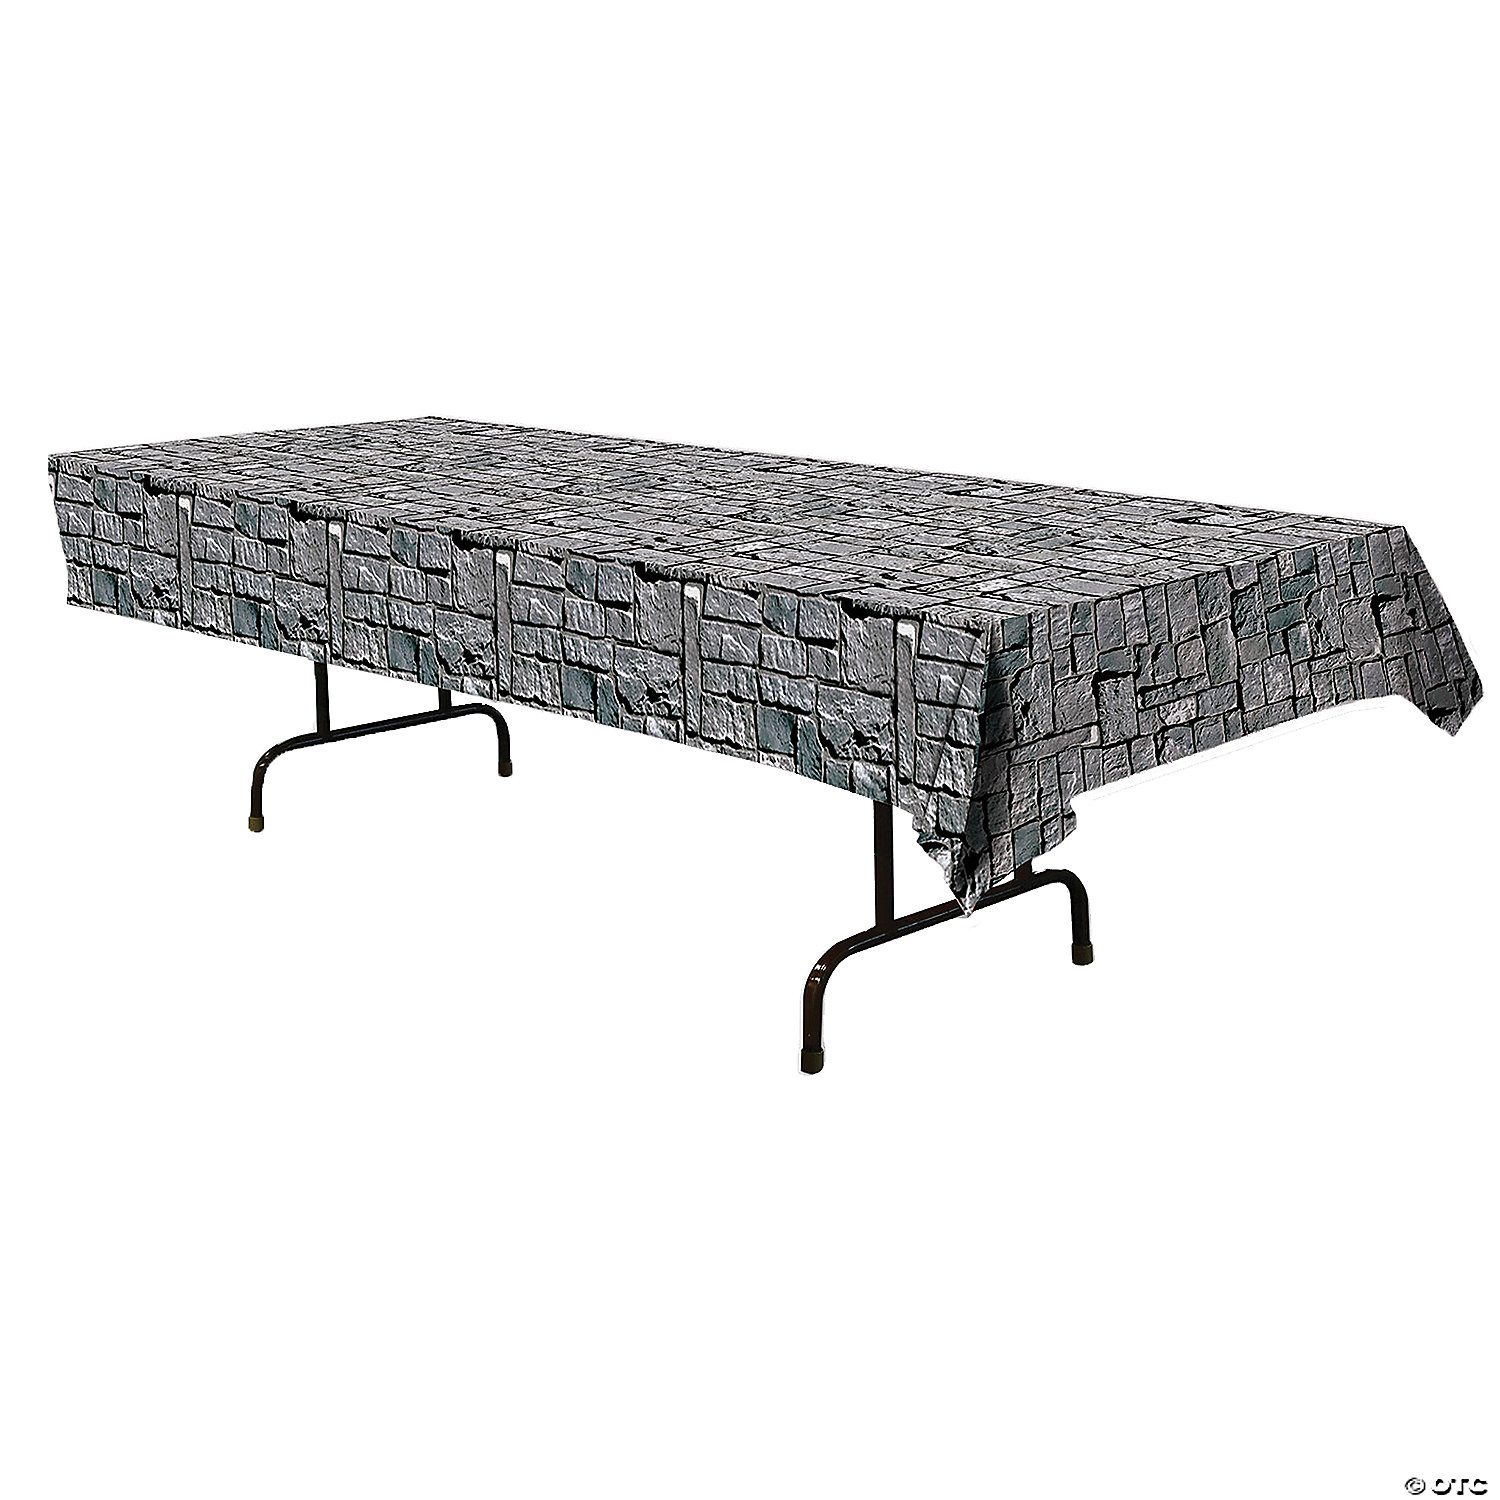 STONE WALL TABLECOVER - HALLOWEEN